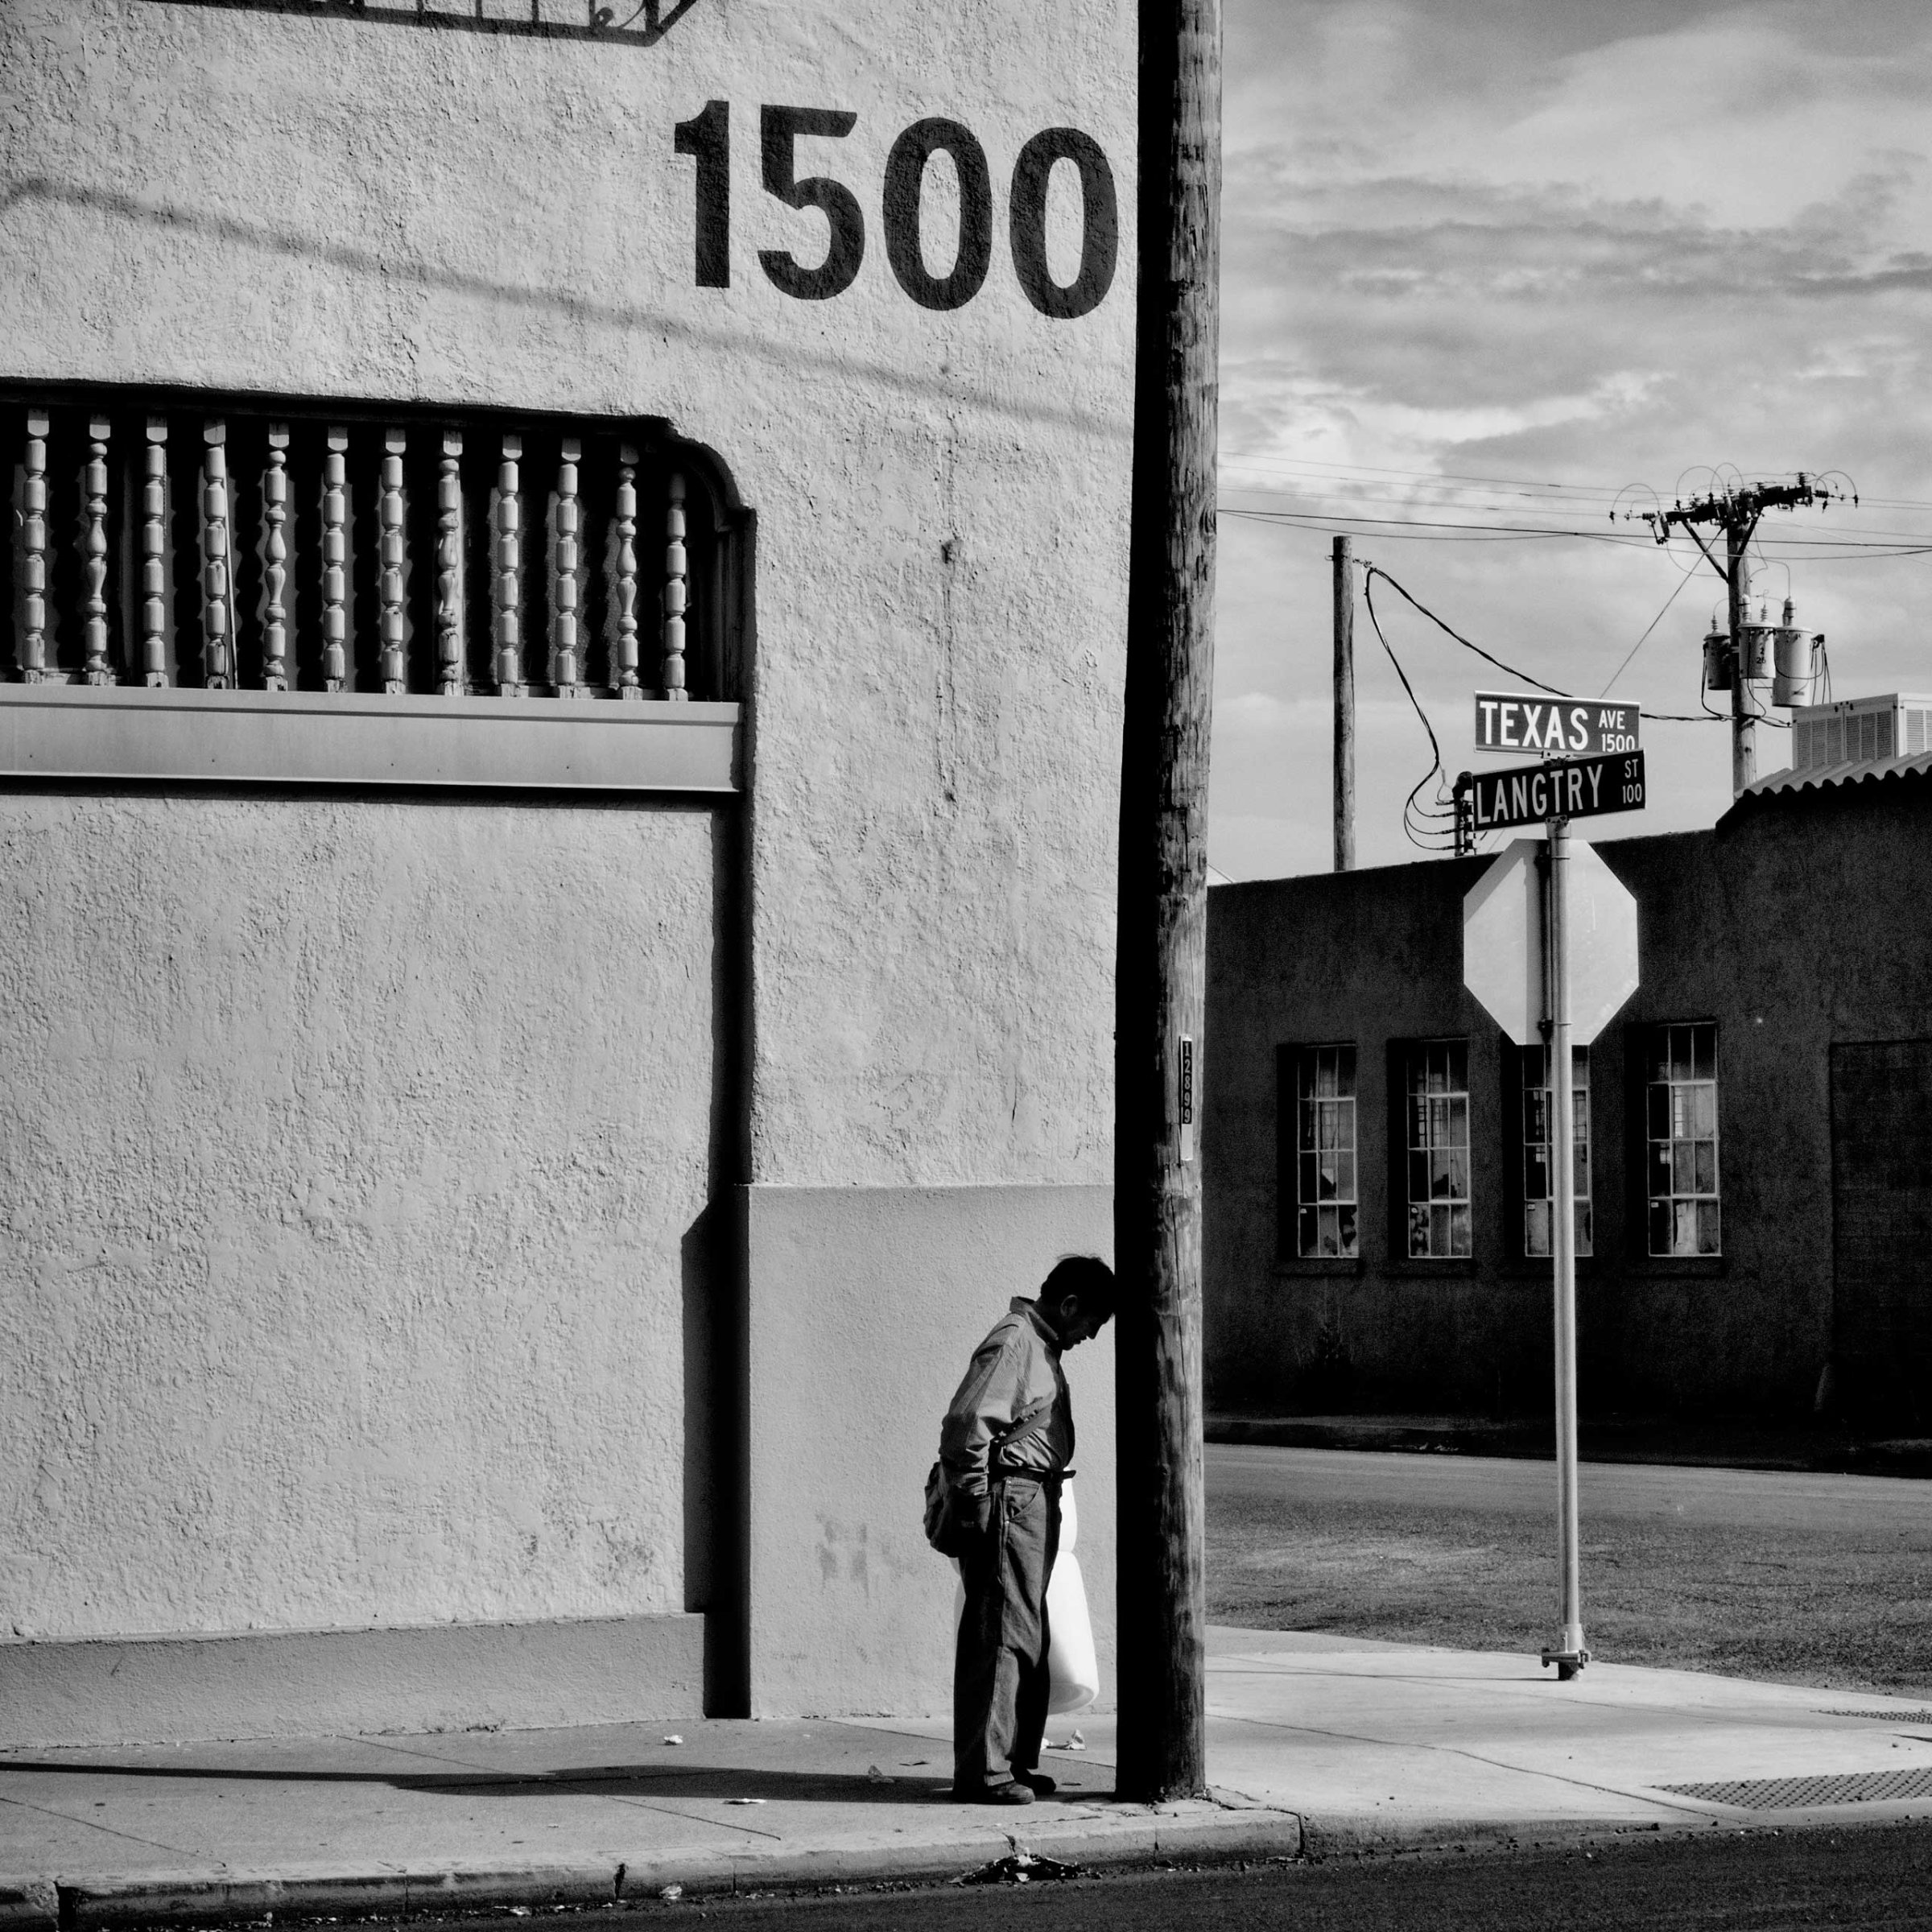 The Geography of Poverty USA - El Paso, TX. El Paso is a city in El Paso County, Texas. The population is 649,121 and 21.5% live below the poverty level. #geographyofpoverty